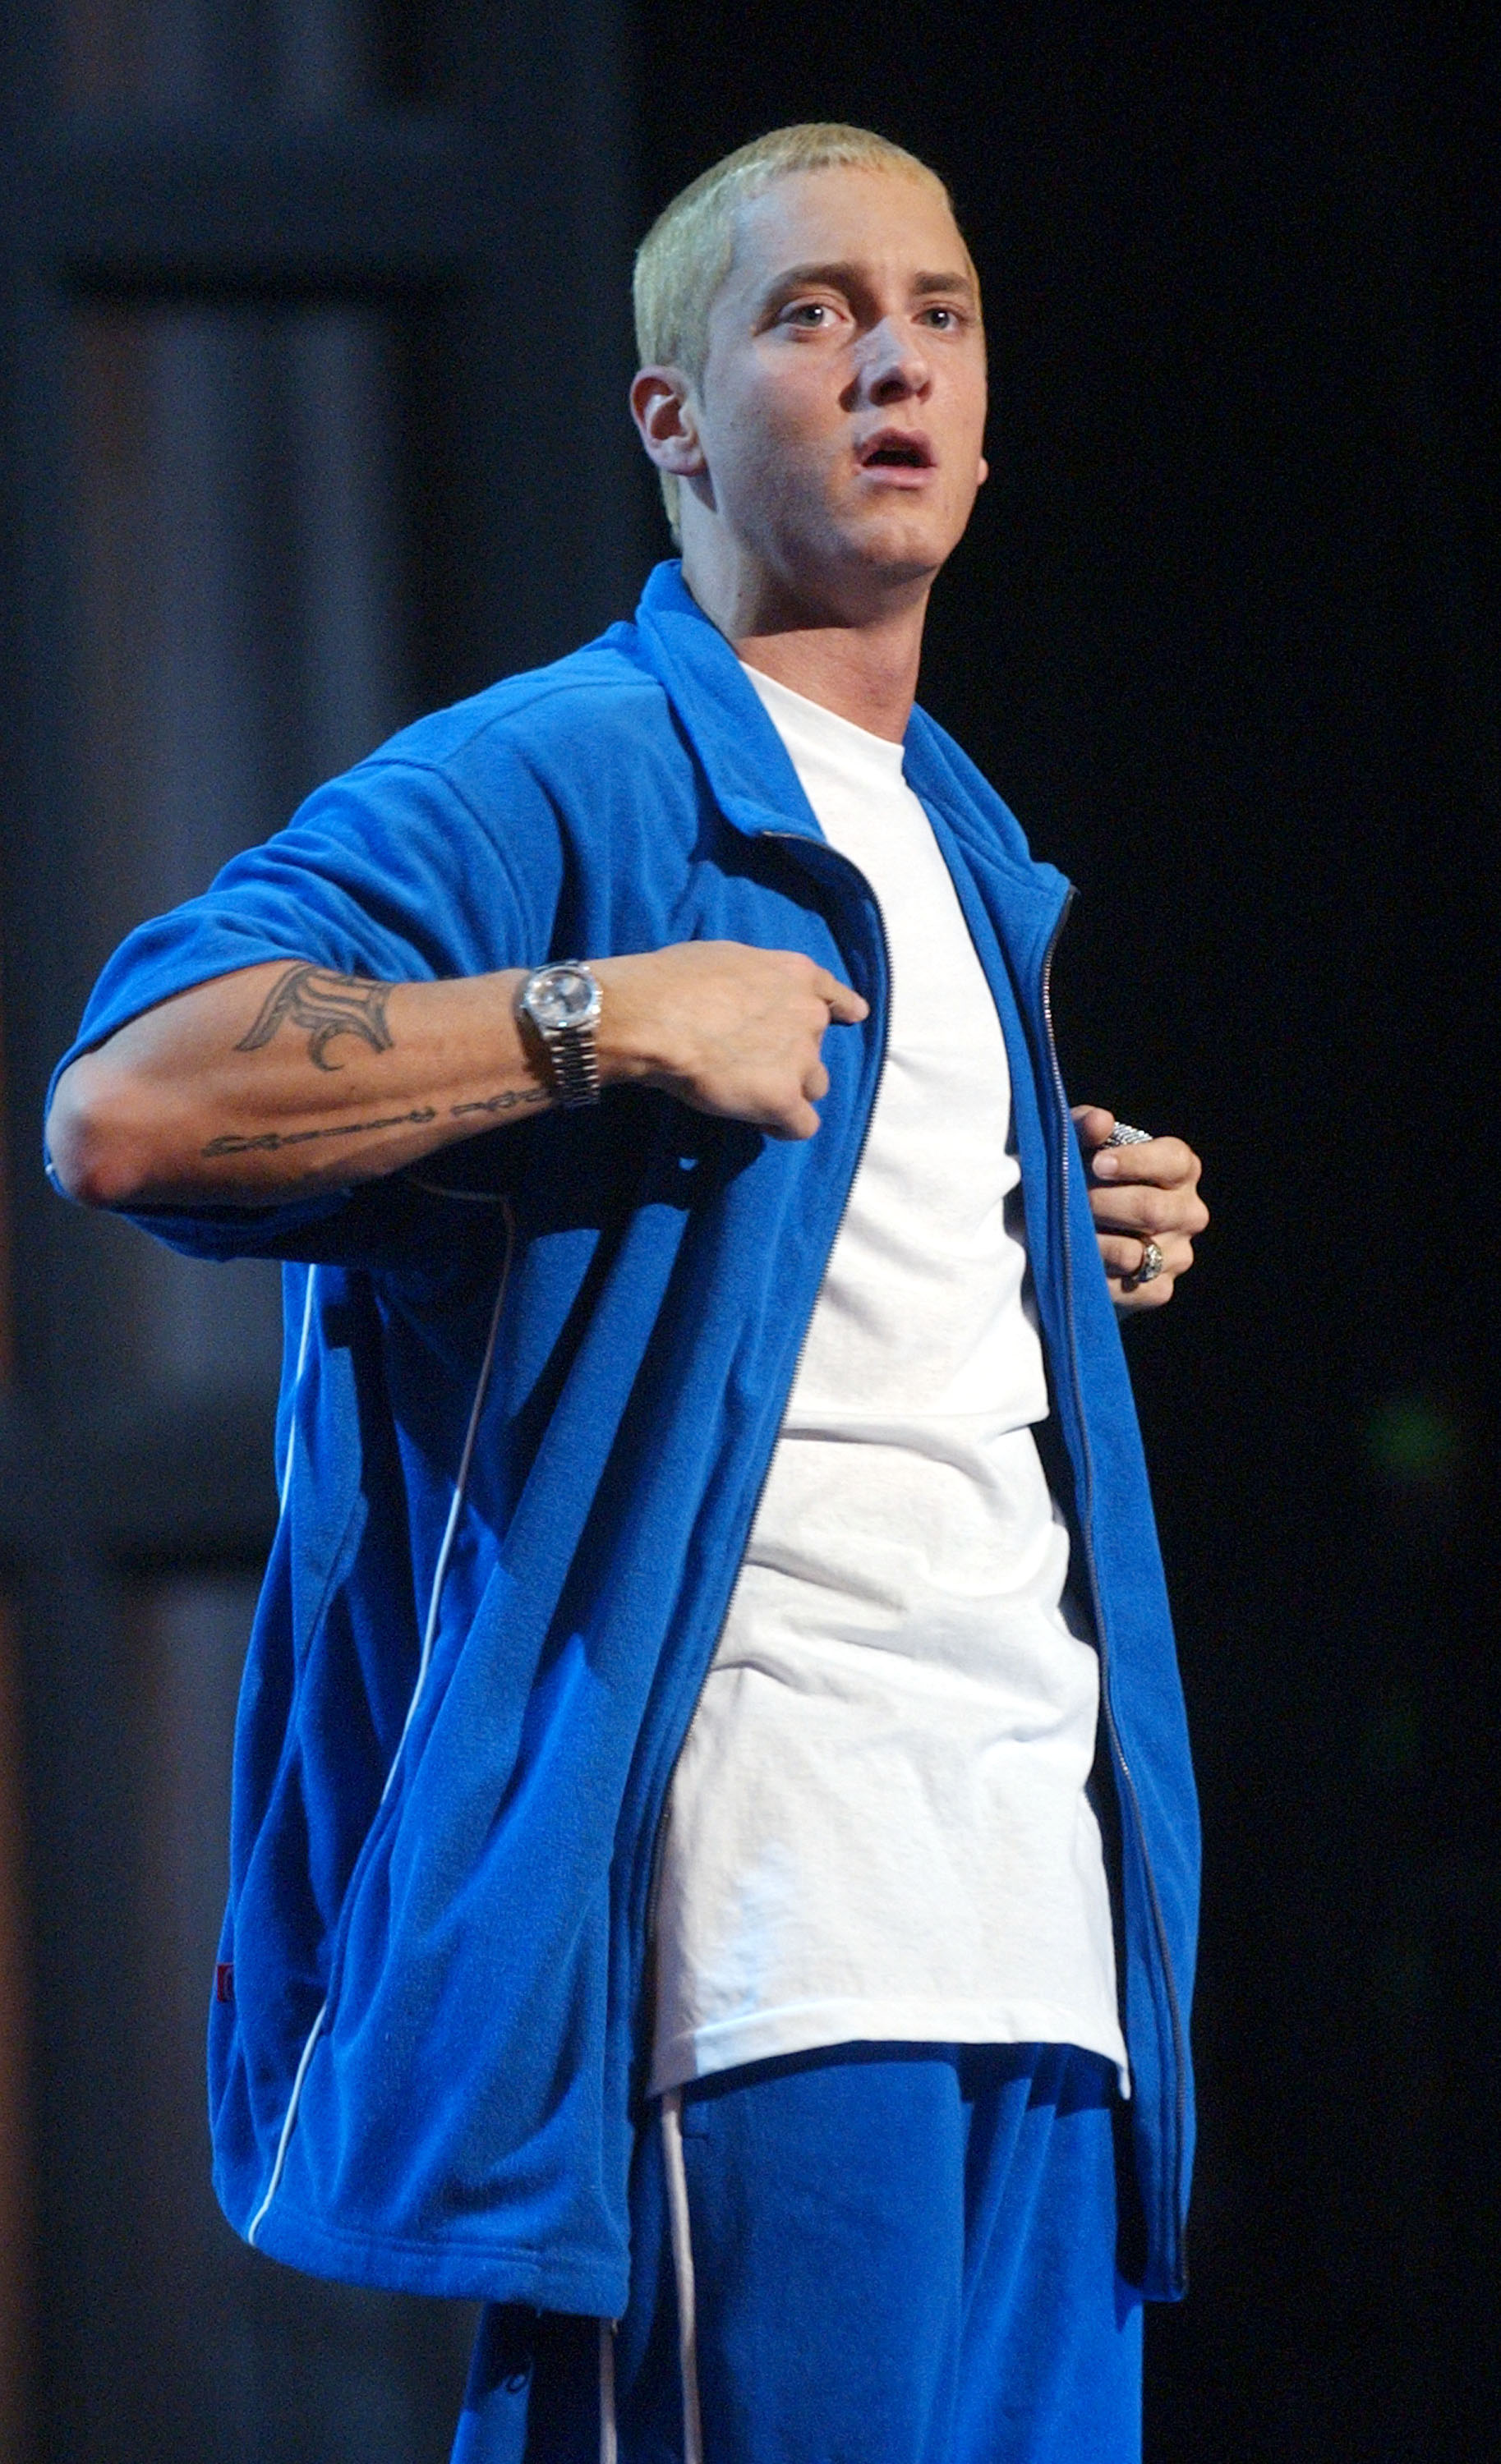 Eminem Has Dark Hair and a Beard — He Looks Totally Different!